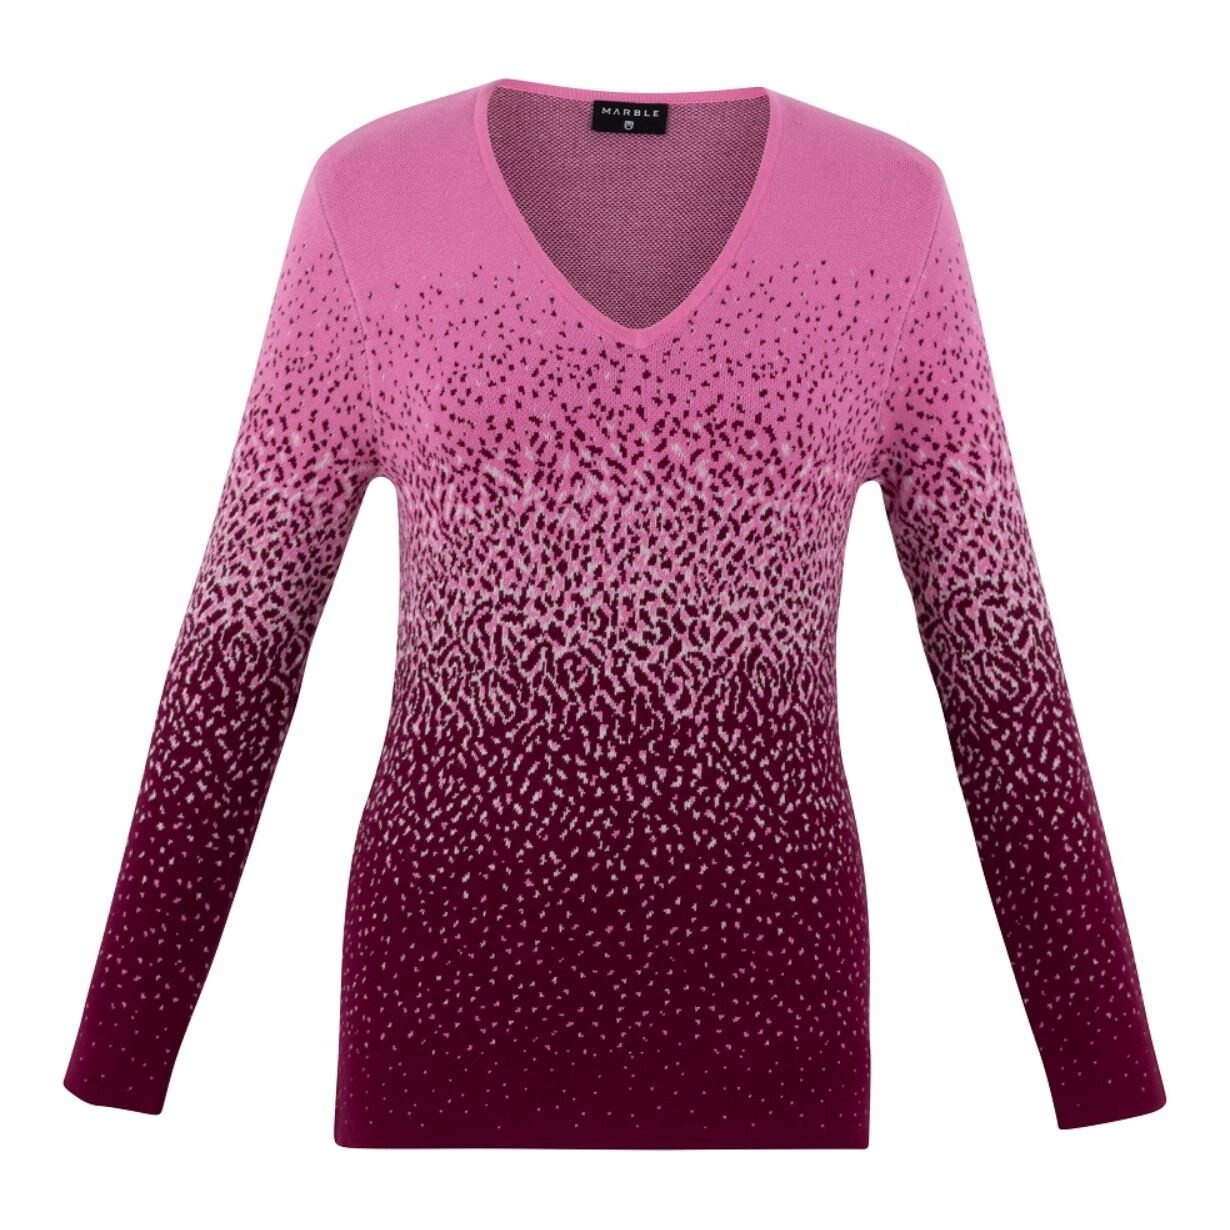 V-Neck Pink/Berry Sweater